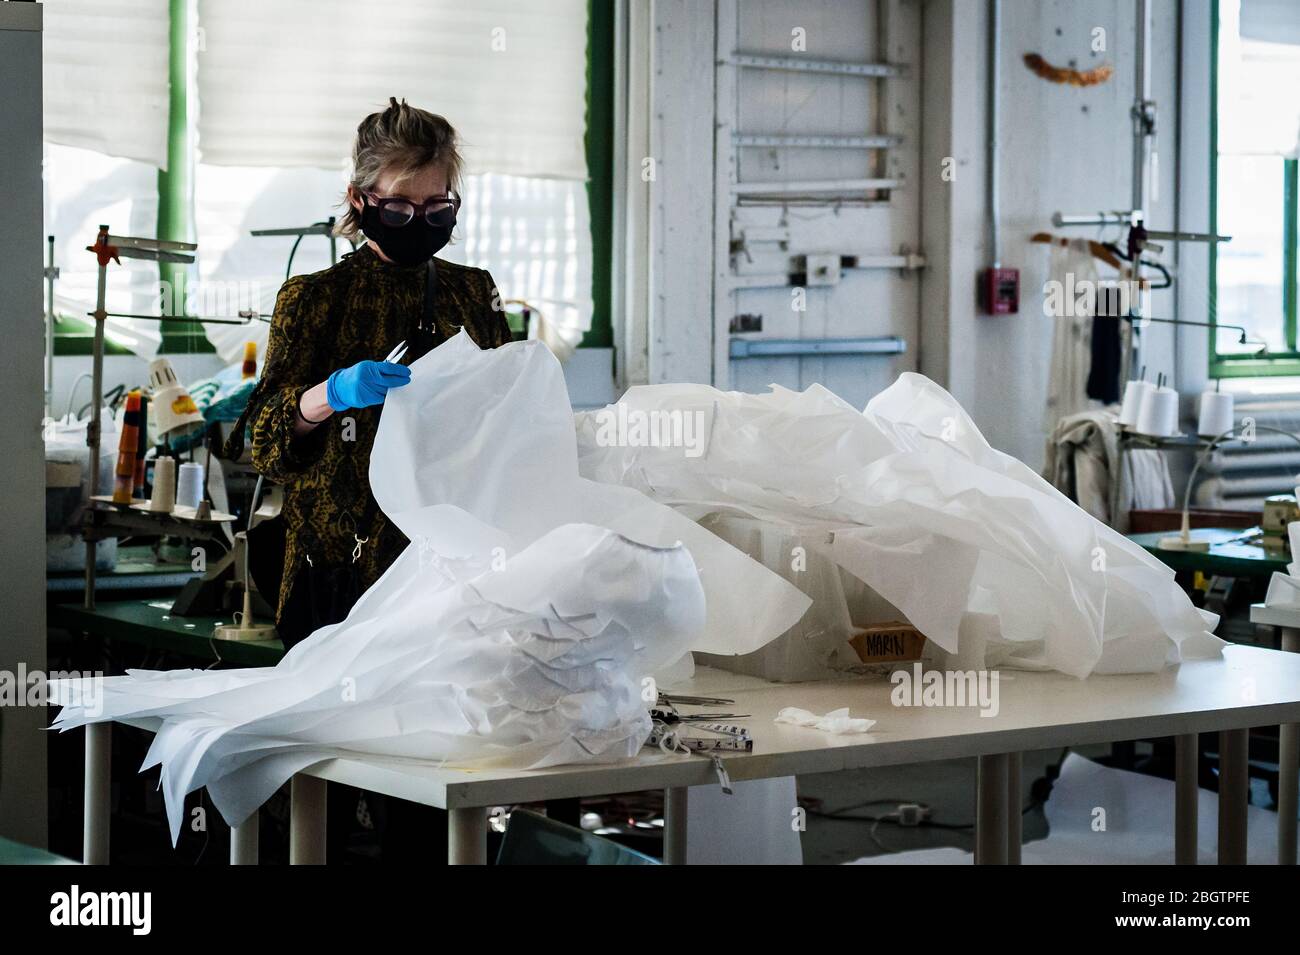 Brooklyn, United States Of America . 22nd Apr, 2020. A seamstress prepares the fabric for reusable hospital gowns for frontline healthcare workers at Malia Mills, a fashion garment factory in Industry City in Brooklyn, New York, on April 22, 2020. (Photo by Gabriele Holtermann-Gorden/Sipa USA) Credit: Sipa USA/Alamy Live News Stock Photo